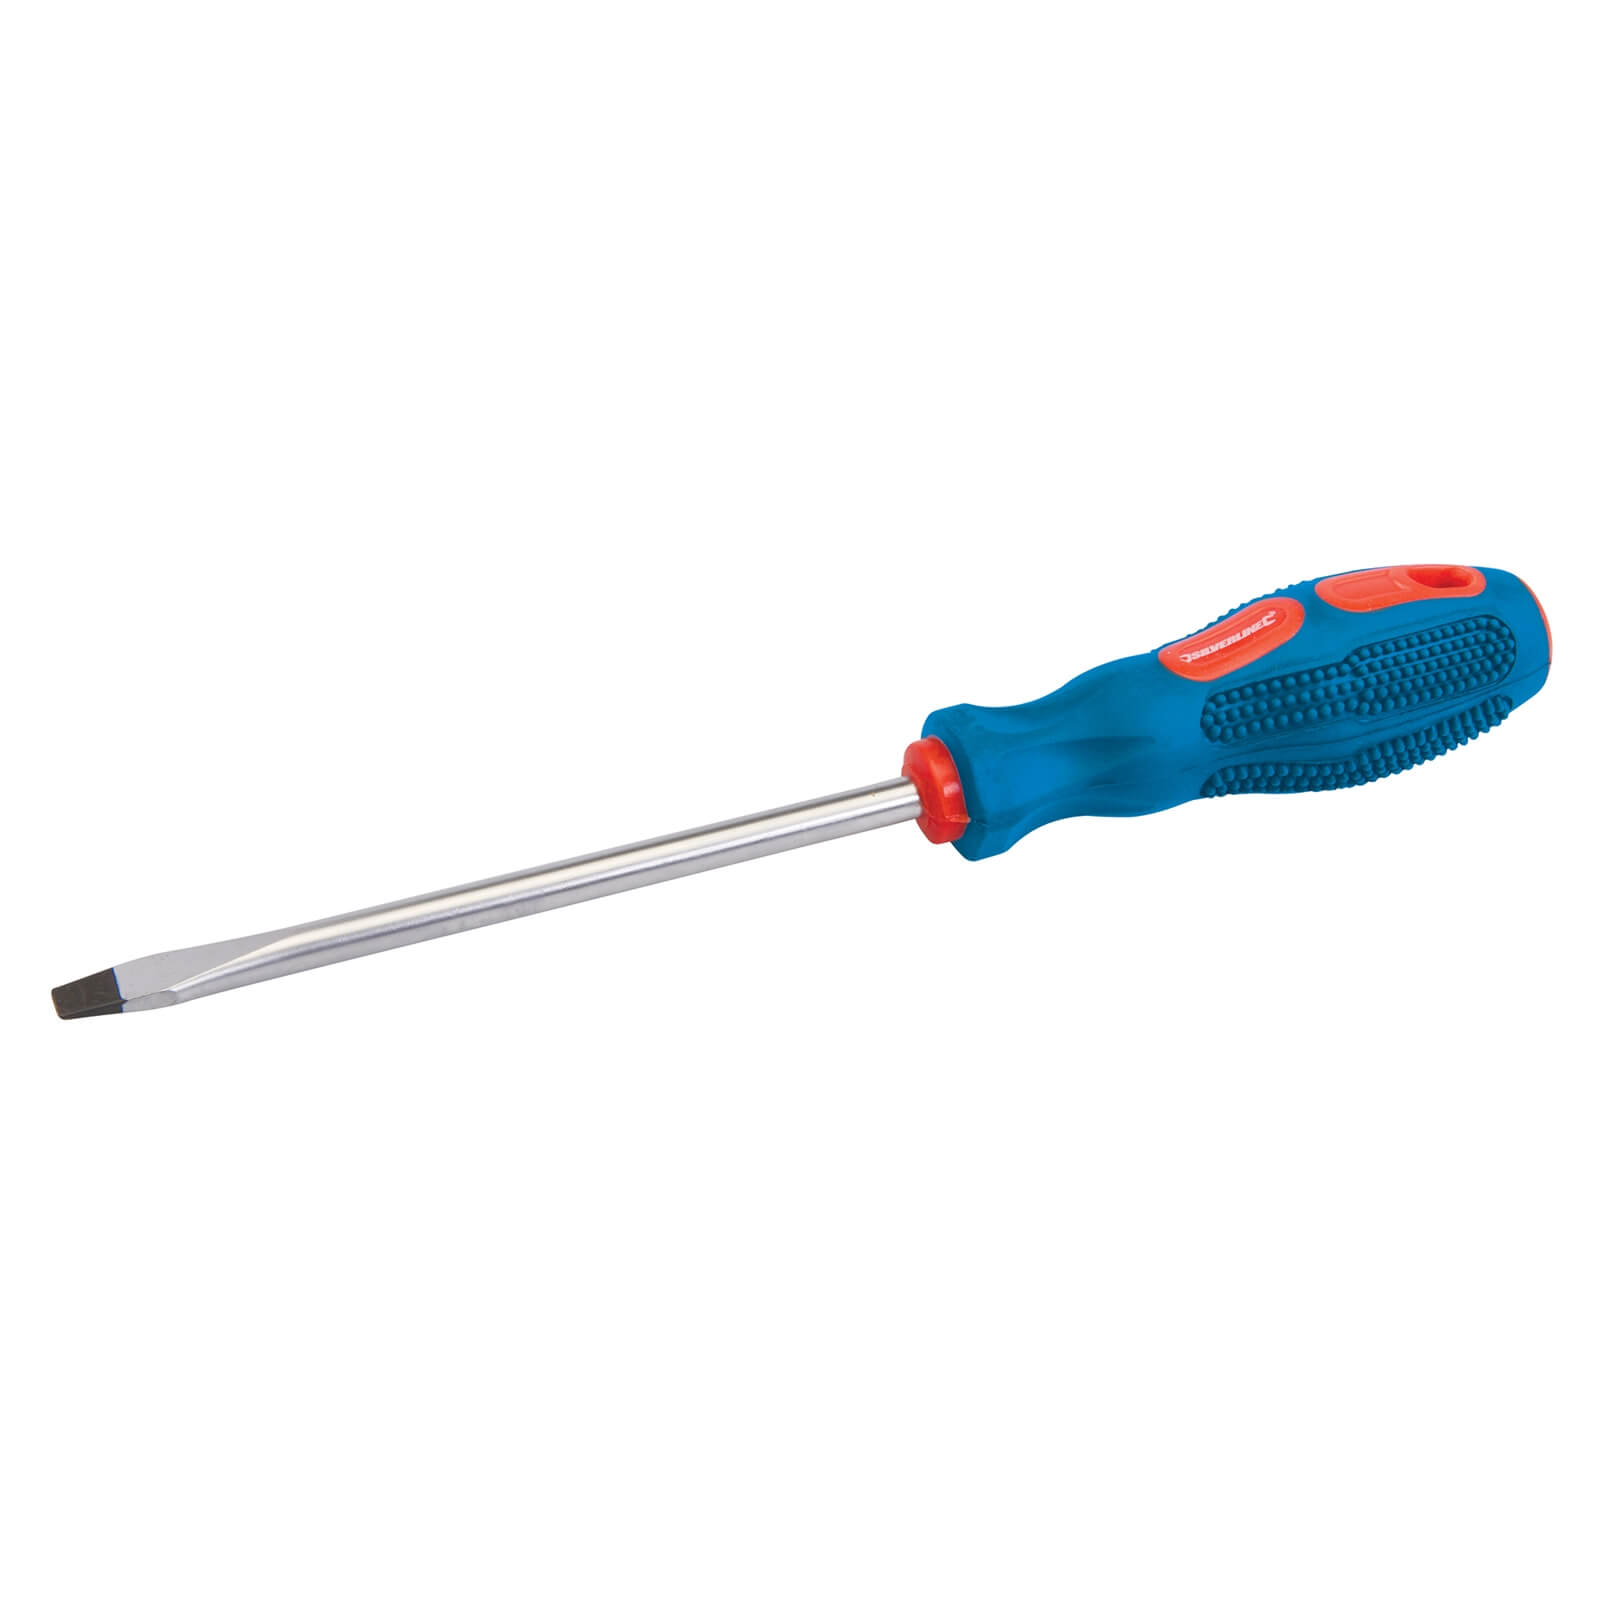 Photo of Silverline General Purpose Screwdriver Slotted Flared 8 X 150mm